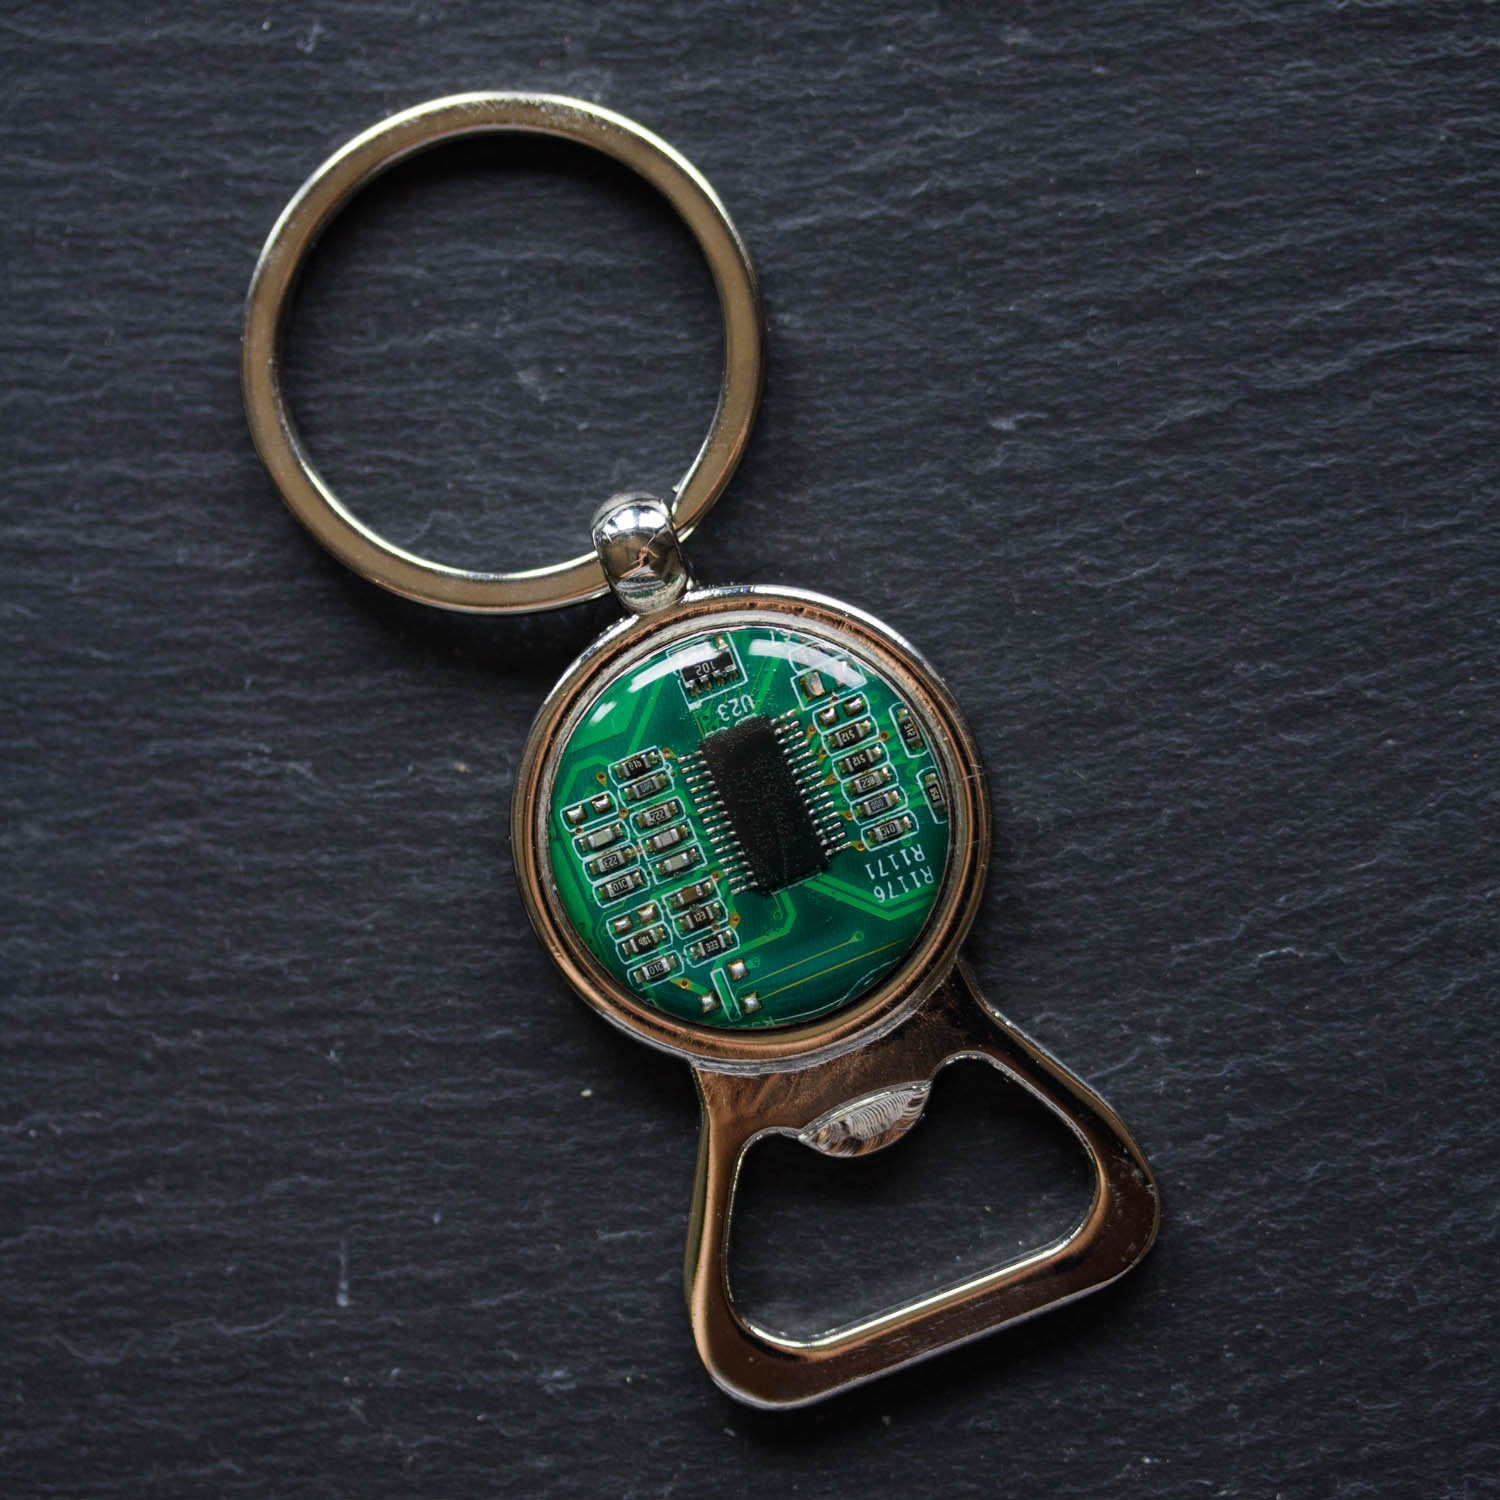 Bottle opener keychain with a circuit board